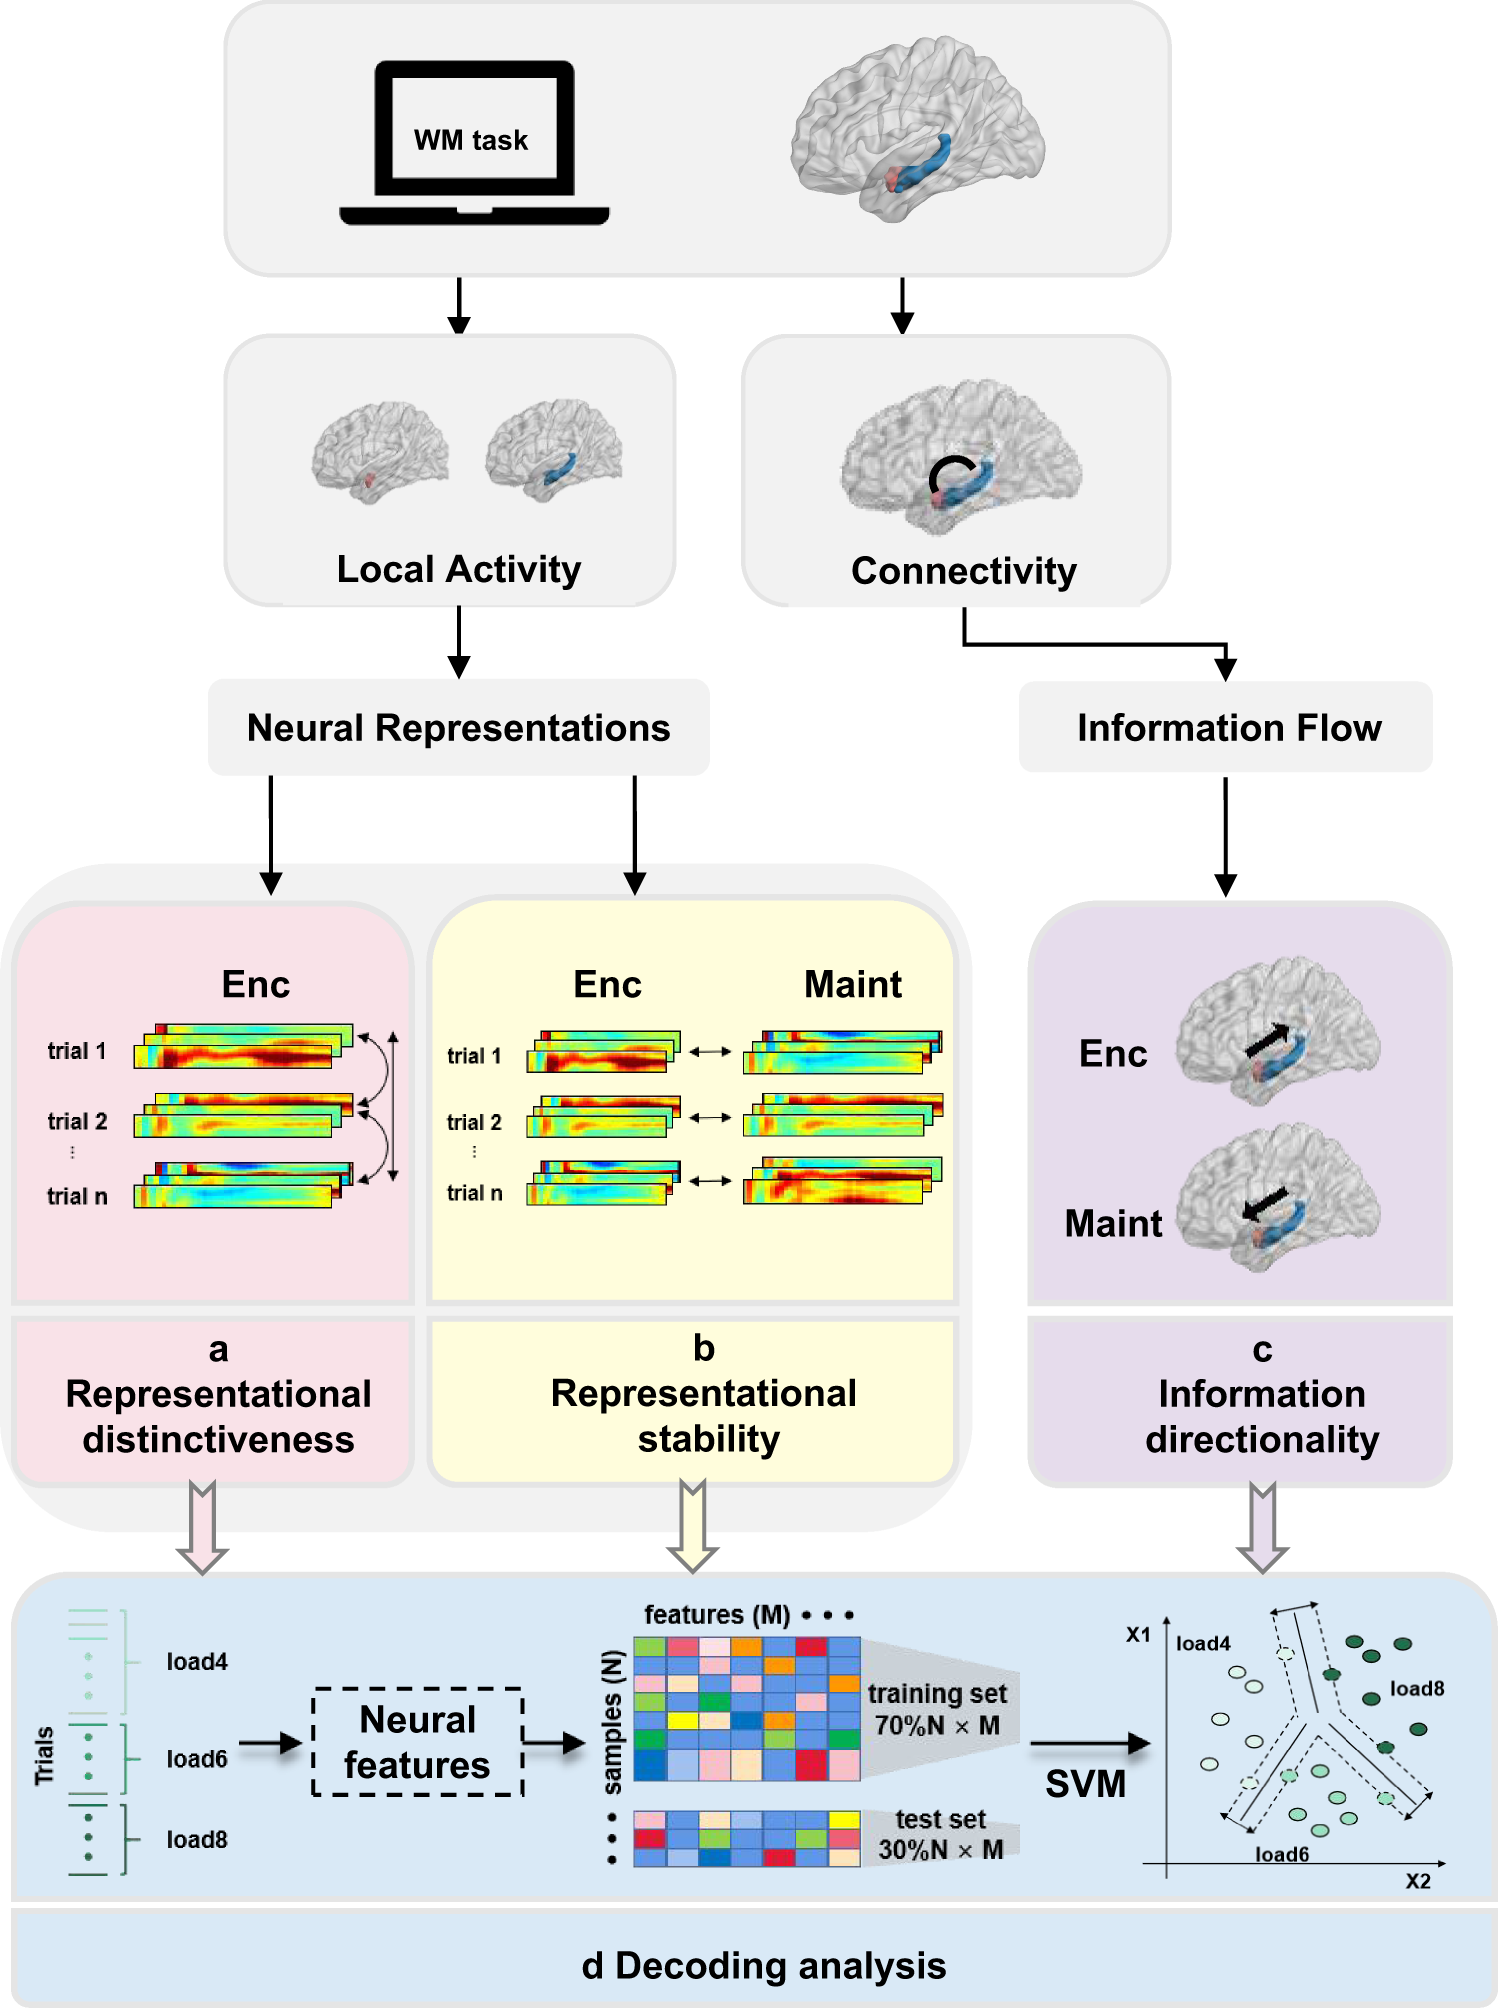 Functional specialization and interaction in the amygdala-hippocampus  circuit during working memory processing | Nature Communications